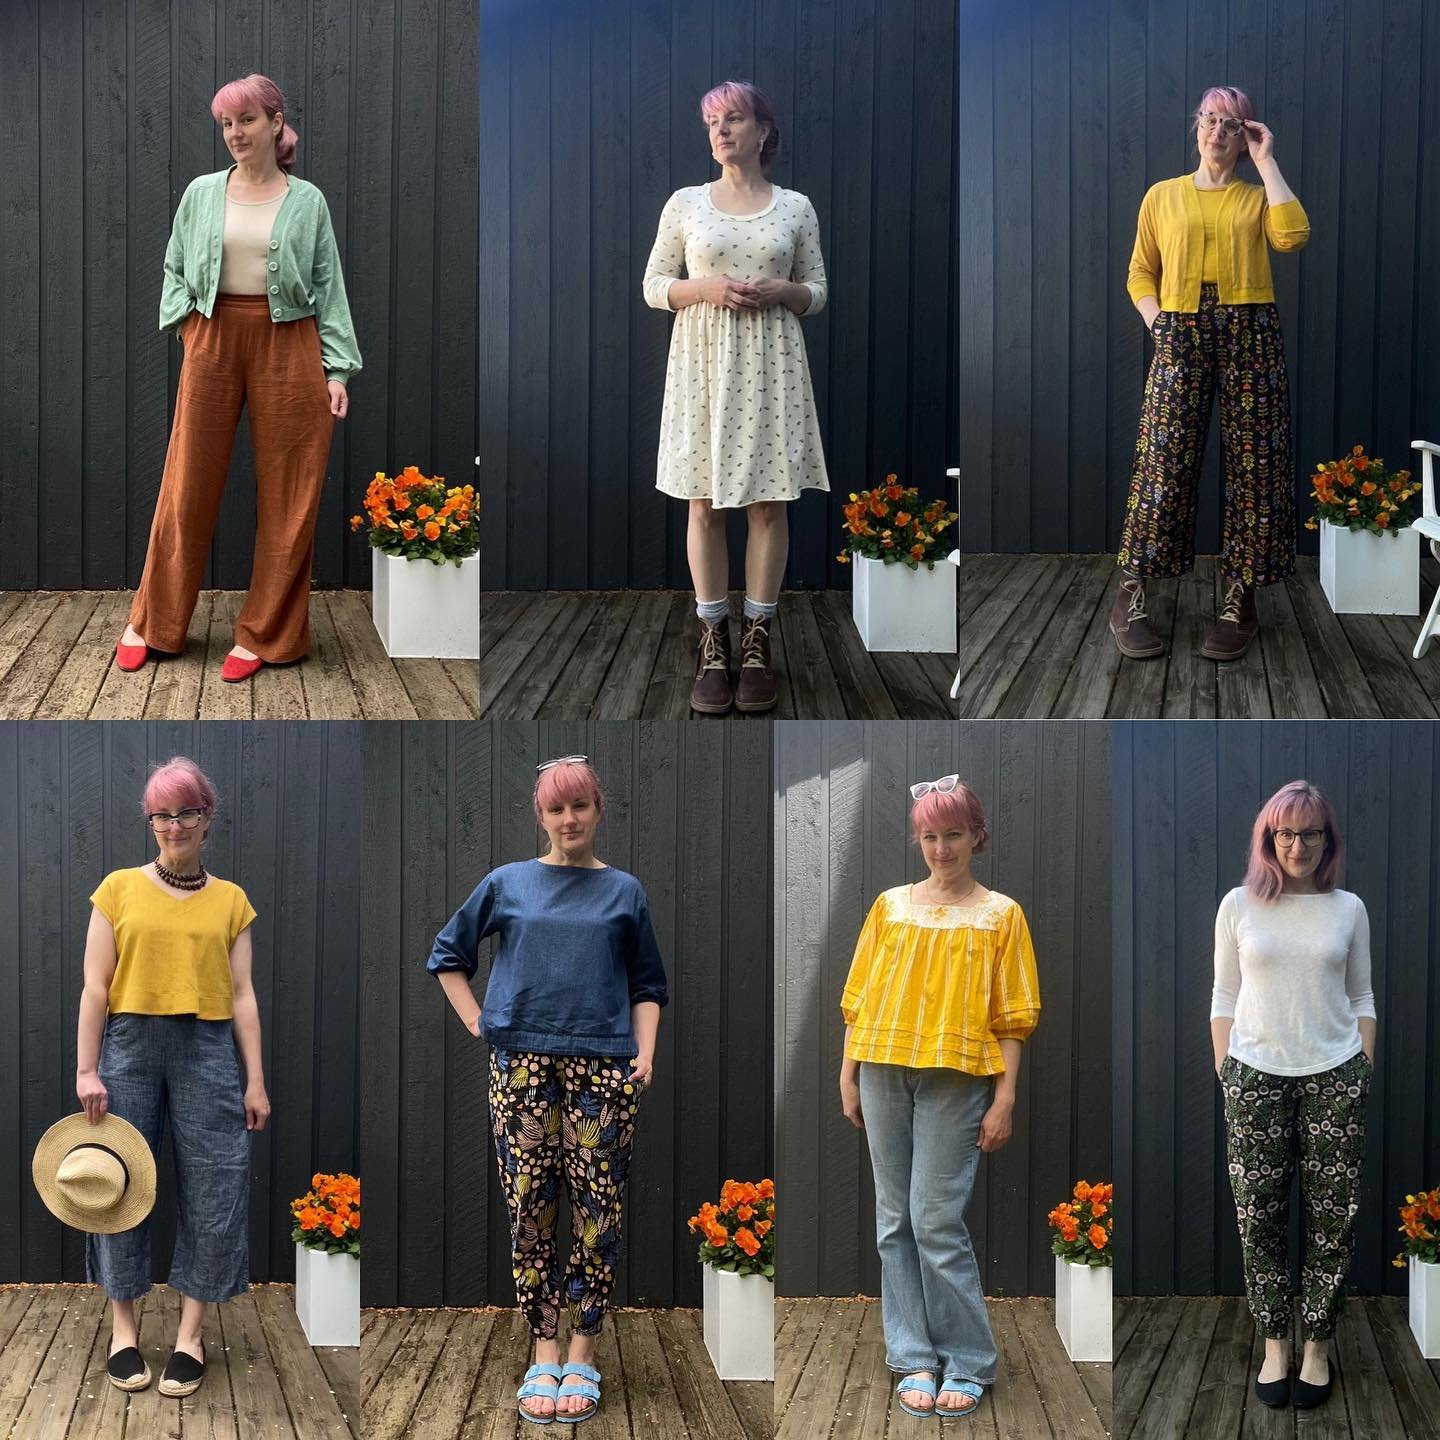 MMM Outfits Week 2 
💛
🌱Yellow Emerald Top + self drafted chambray cropped pants
🌱Yellow Garnet top + RTW jeans
🌱Sweater knit Jade tee + floral Luna pants 
🌱Cream jersey Jade + Isla mashup dress 
Luna pants + RTW chambray top
🌱Caramel Rose pants